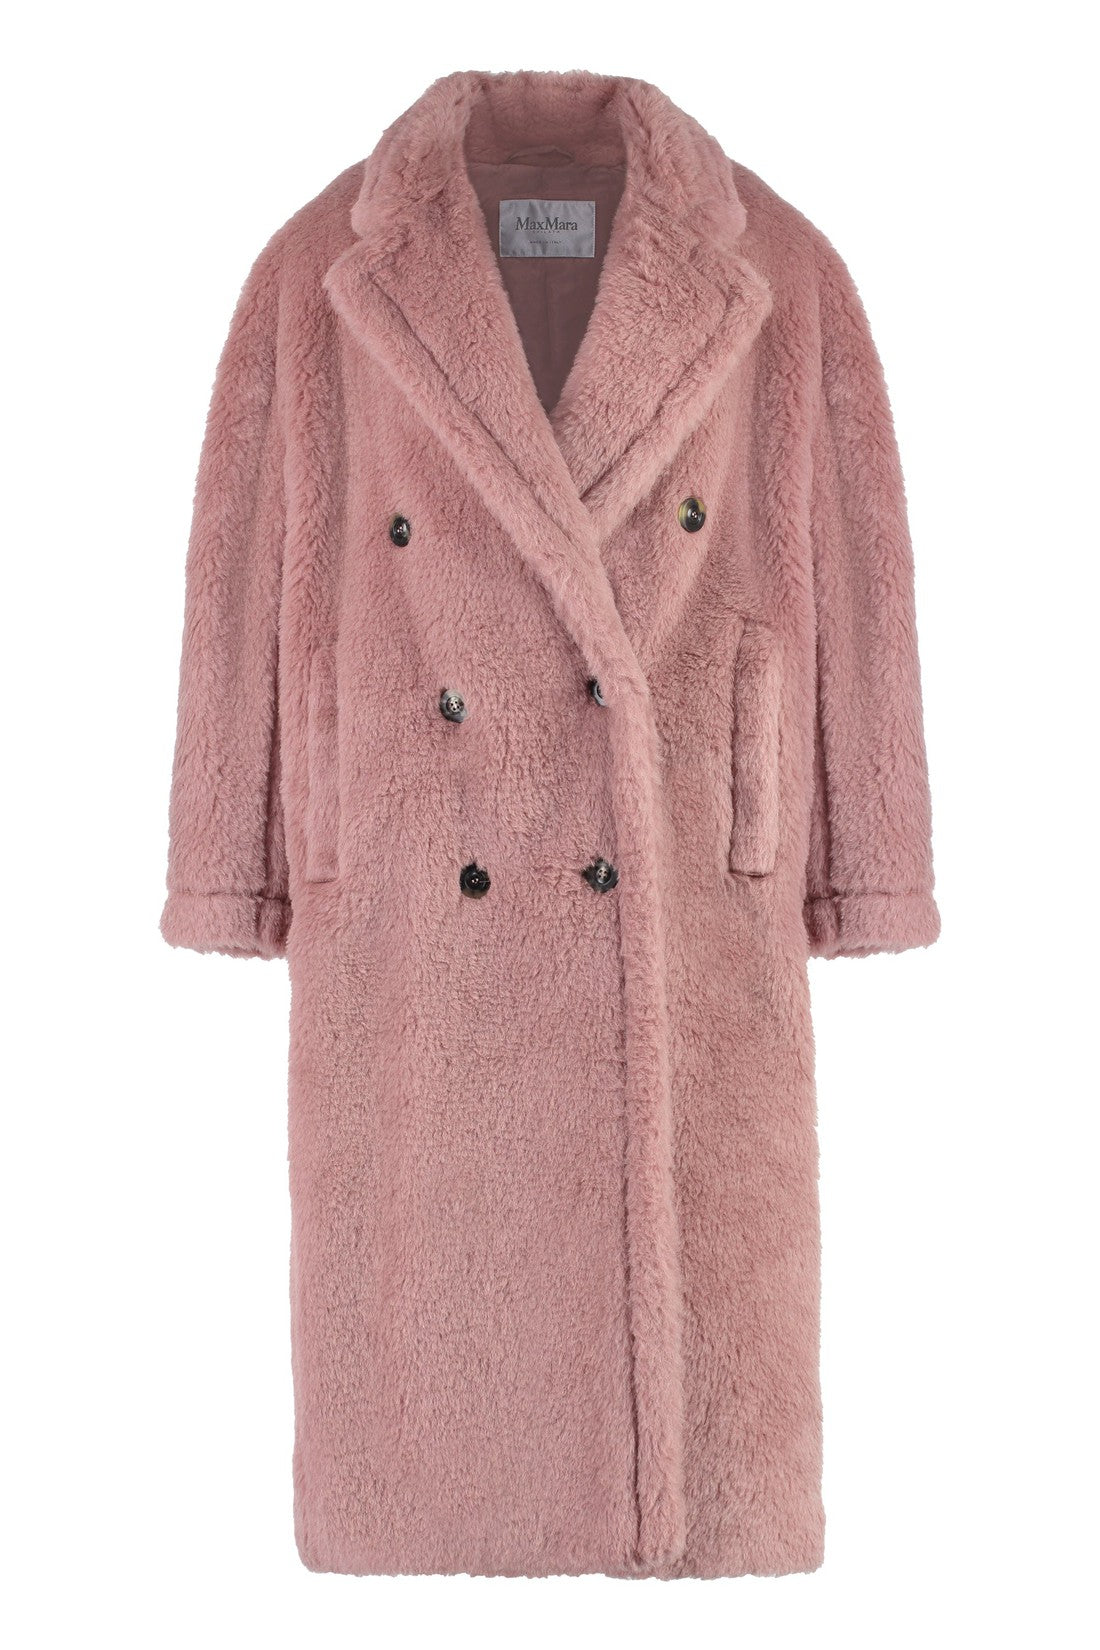 Max Mara-OUTLET-SALE-Zitto Double-breasted wool coat-ARCHIVIST